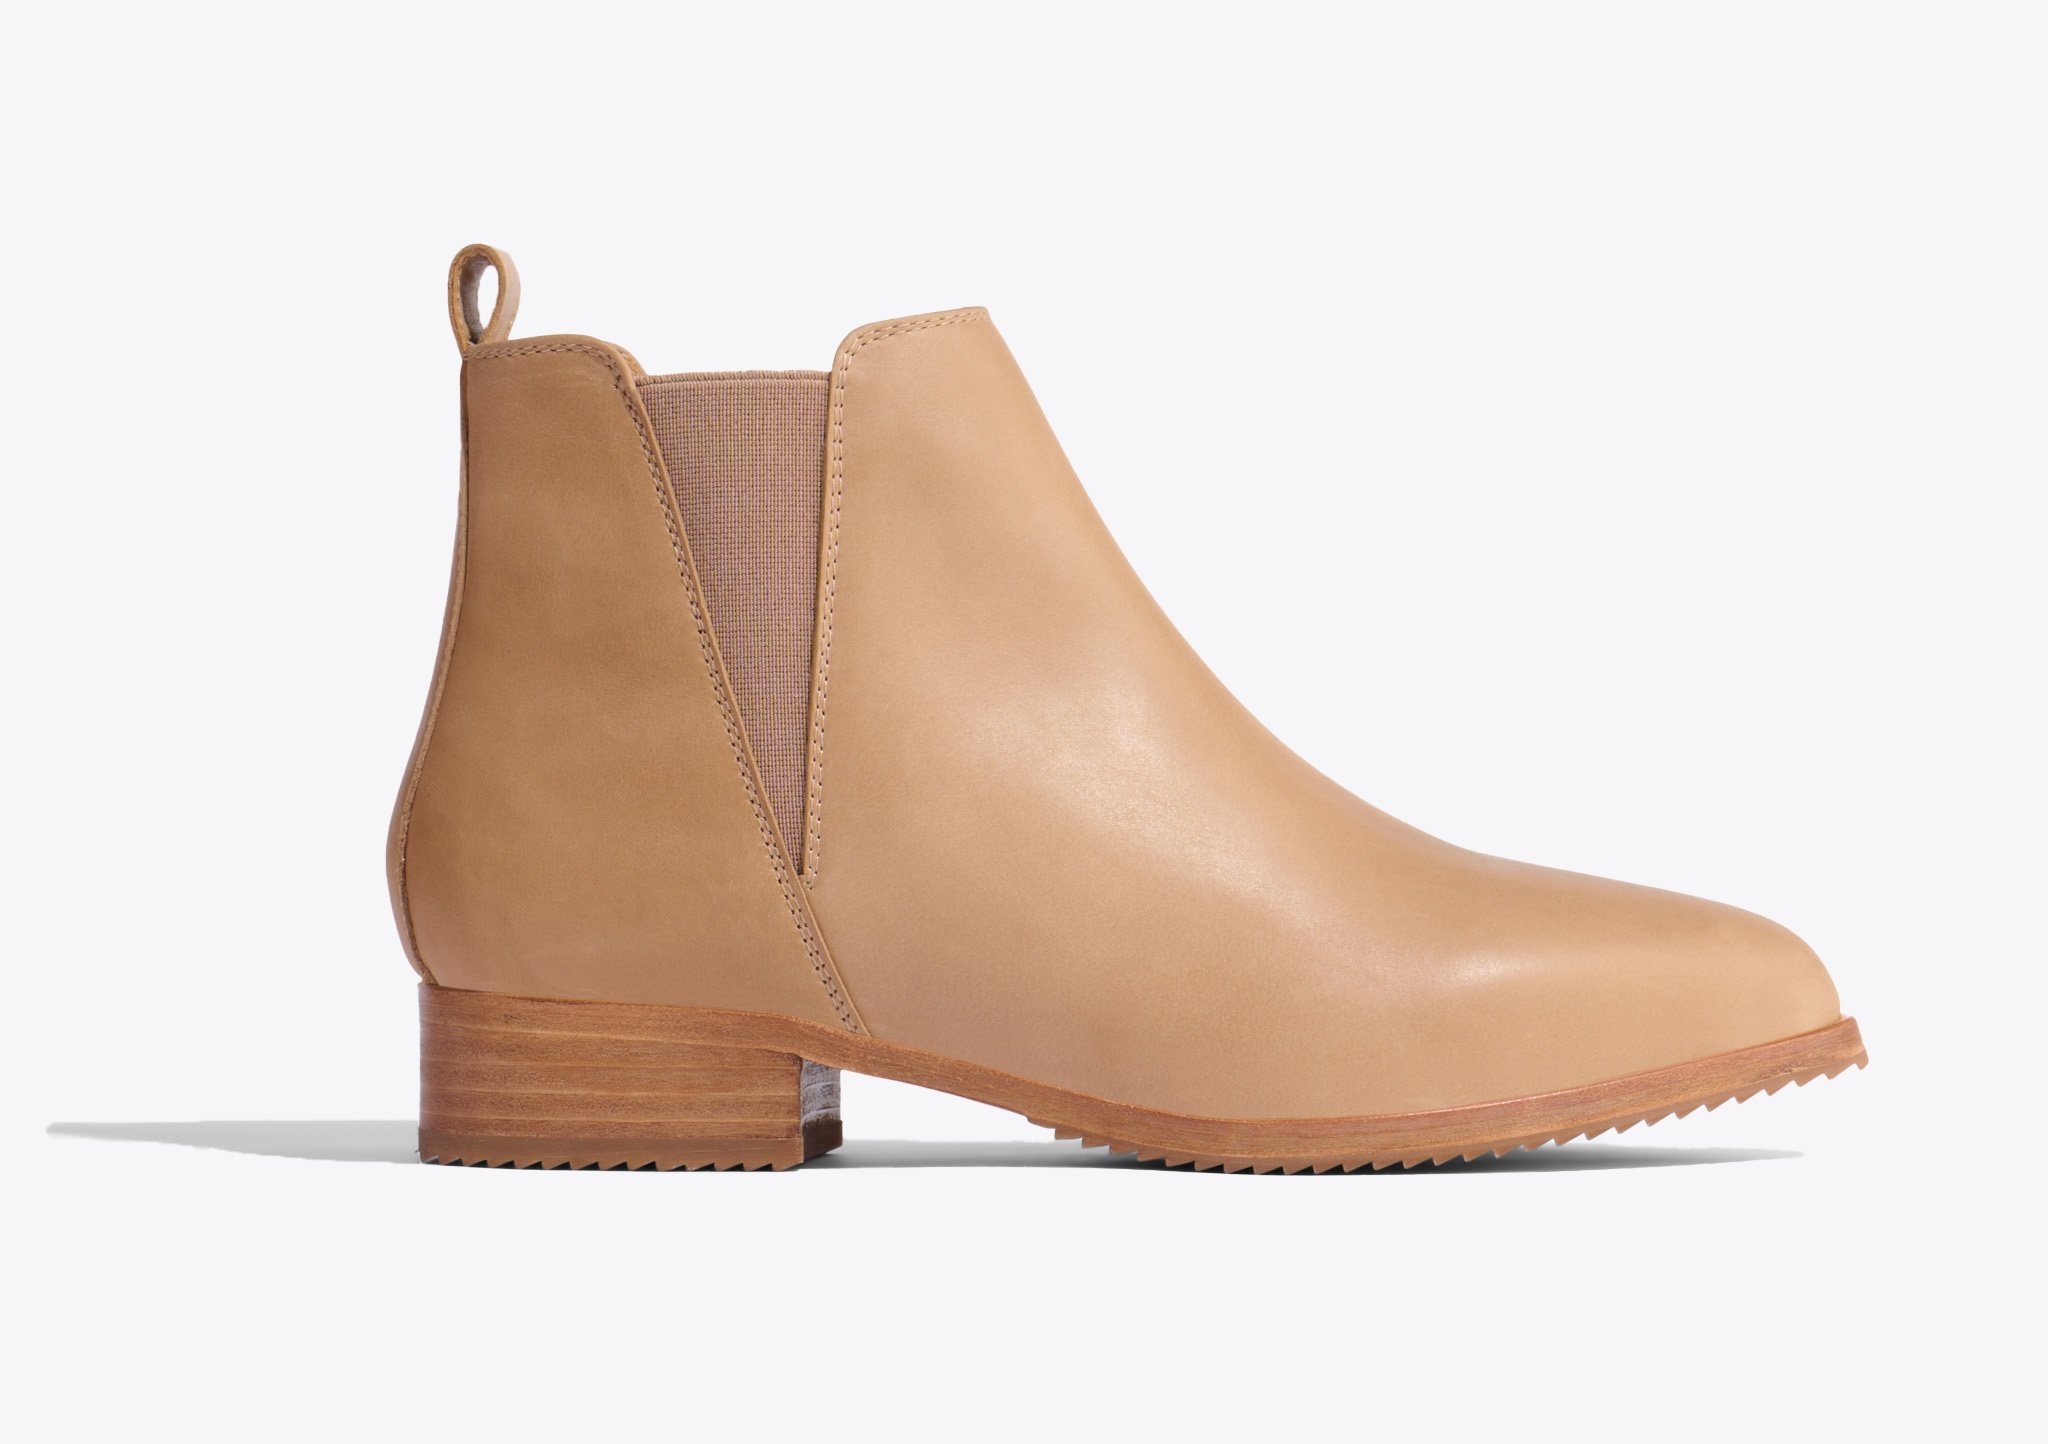 Nisolo Eva Everyday Chelsea Boot Almond - Every Nisolo product is built on the foundation of comfort, function, and design. 